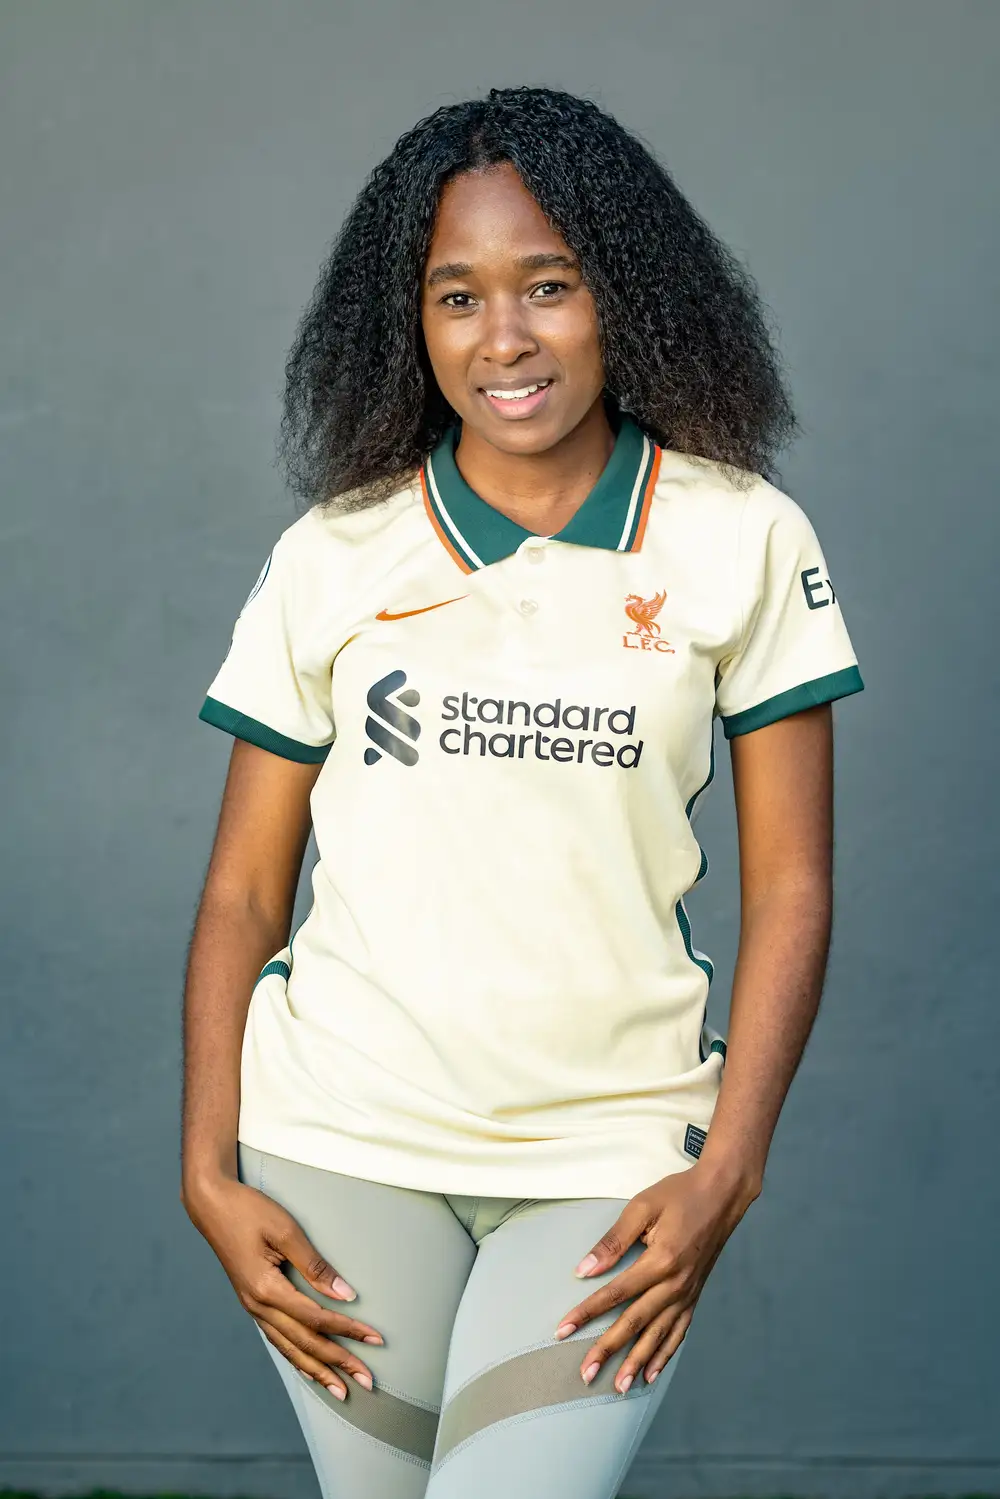 lady on liverpool jersey